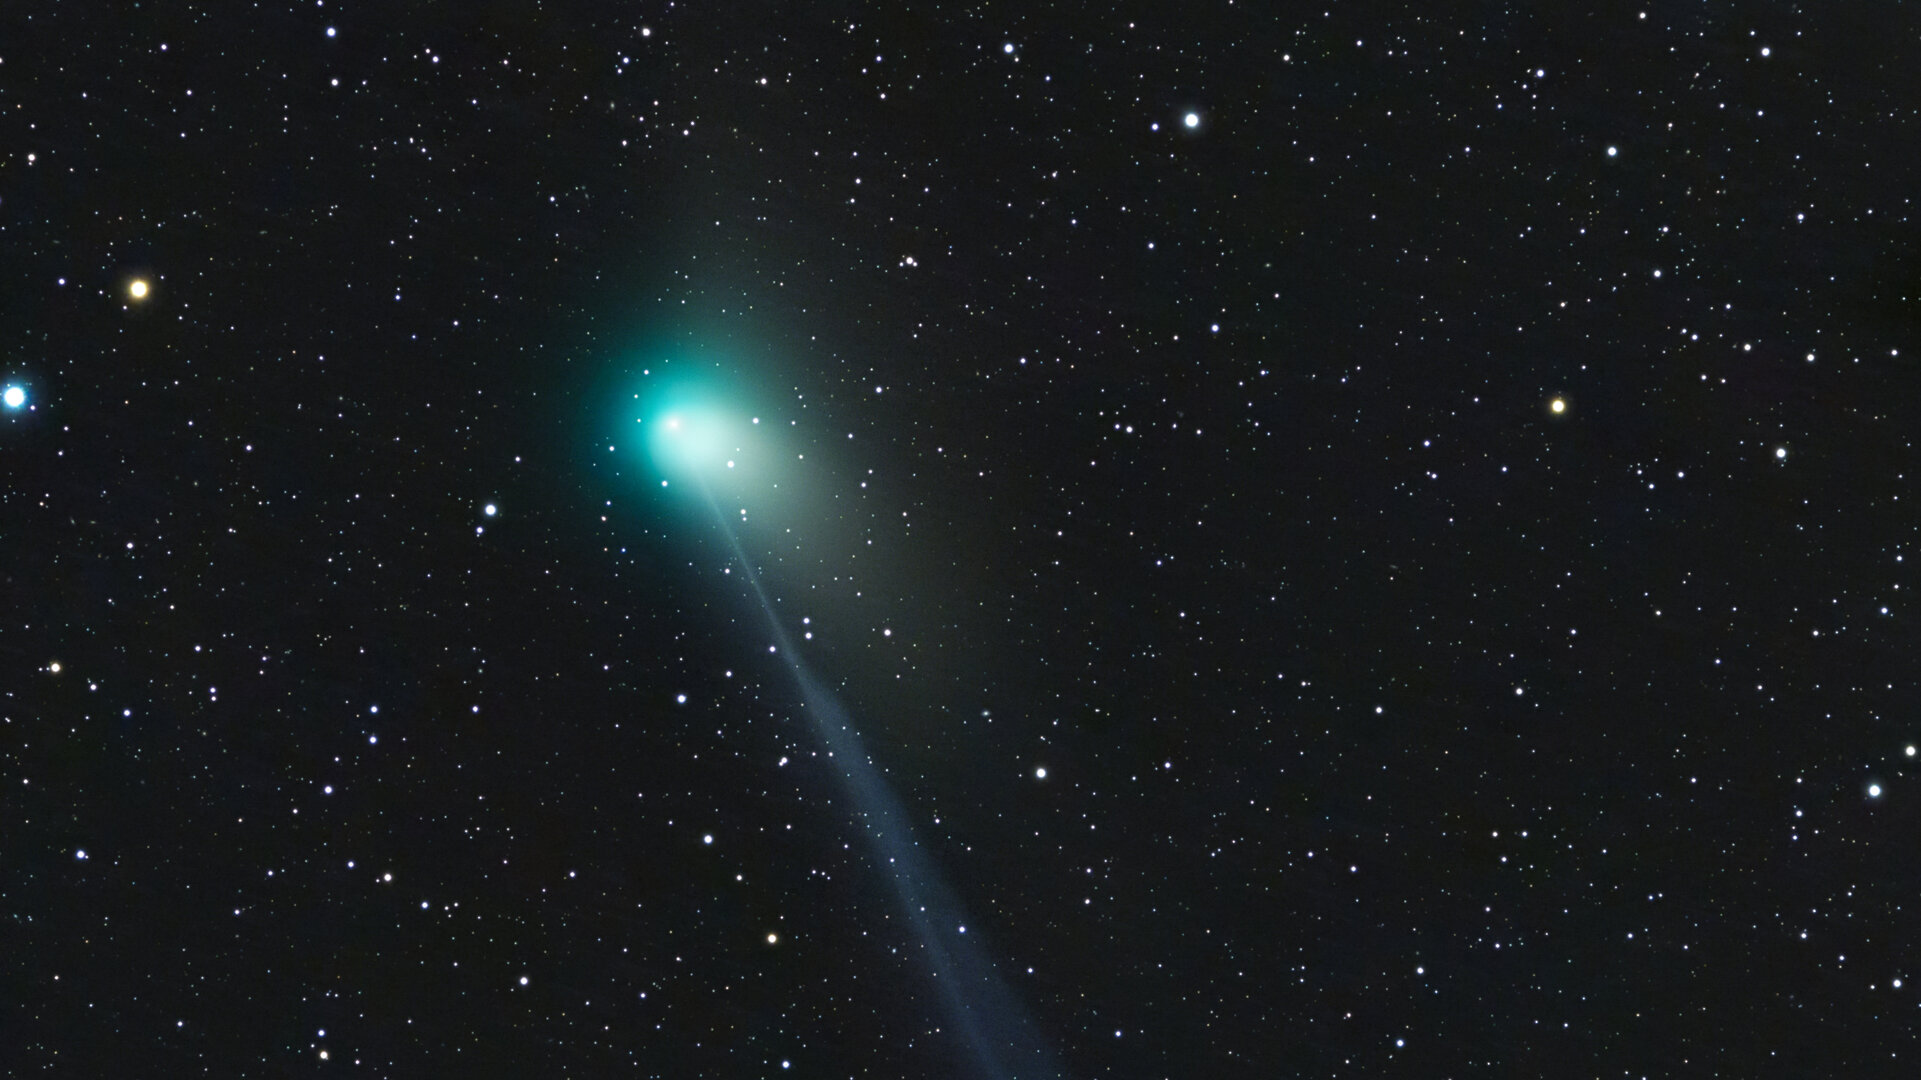 Comet ZTF and its apparent three tails